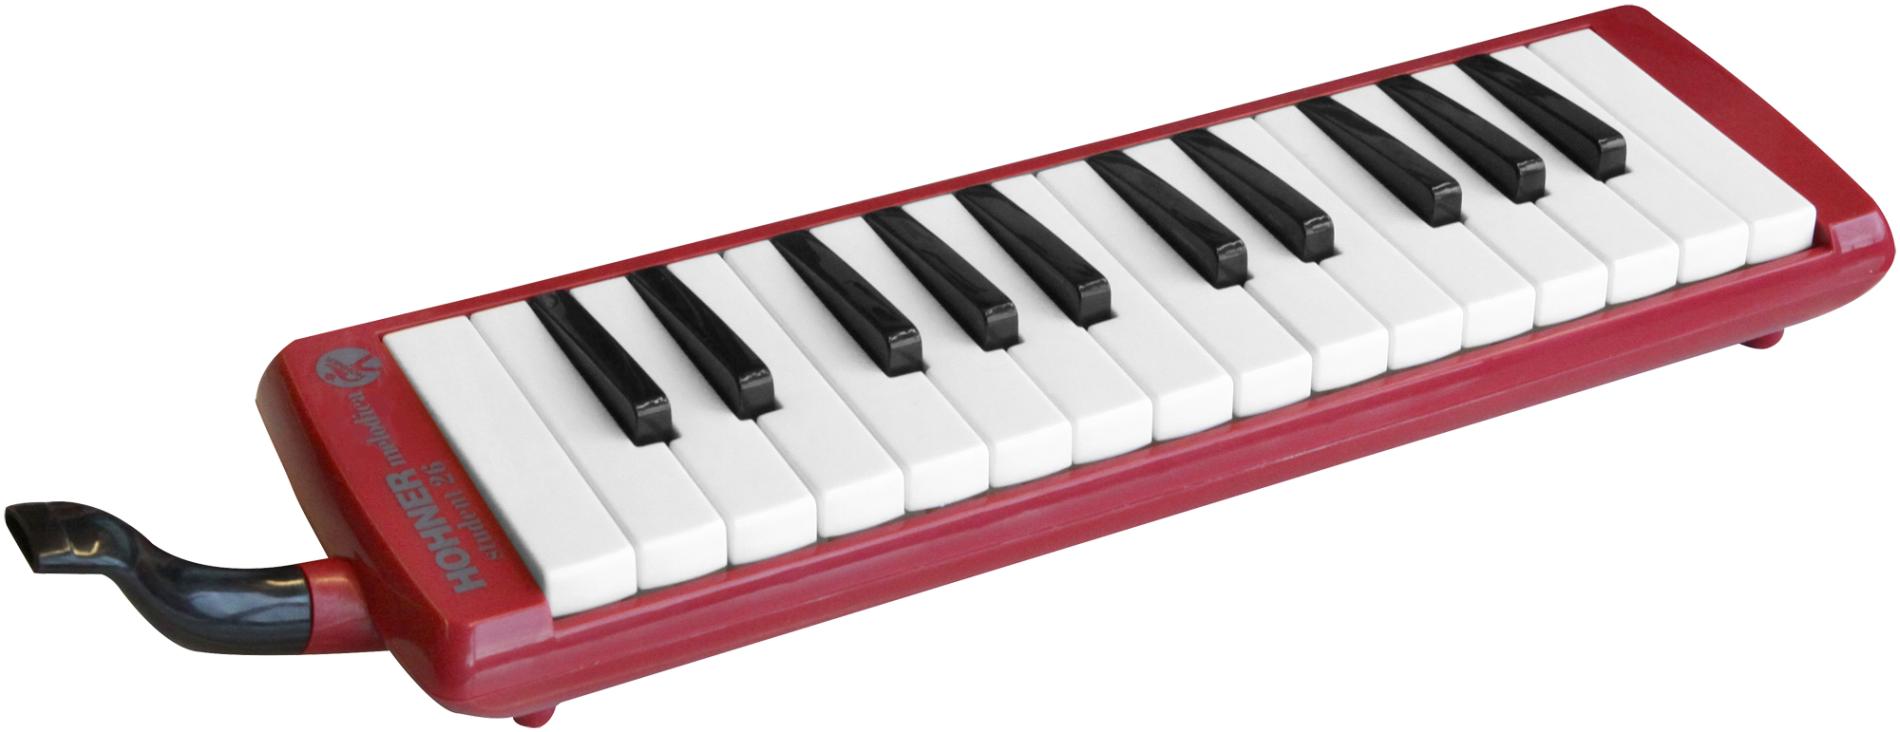 Melodica Student 26 rot